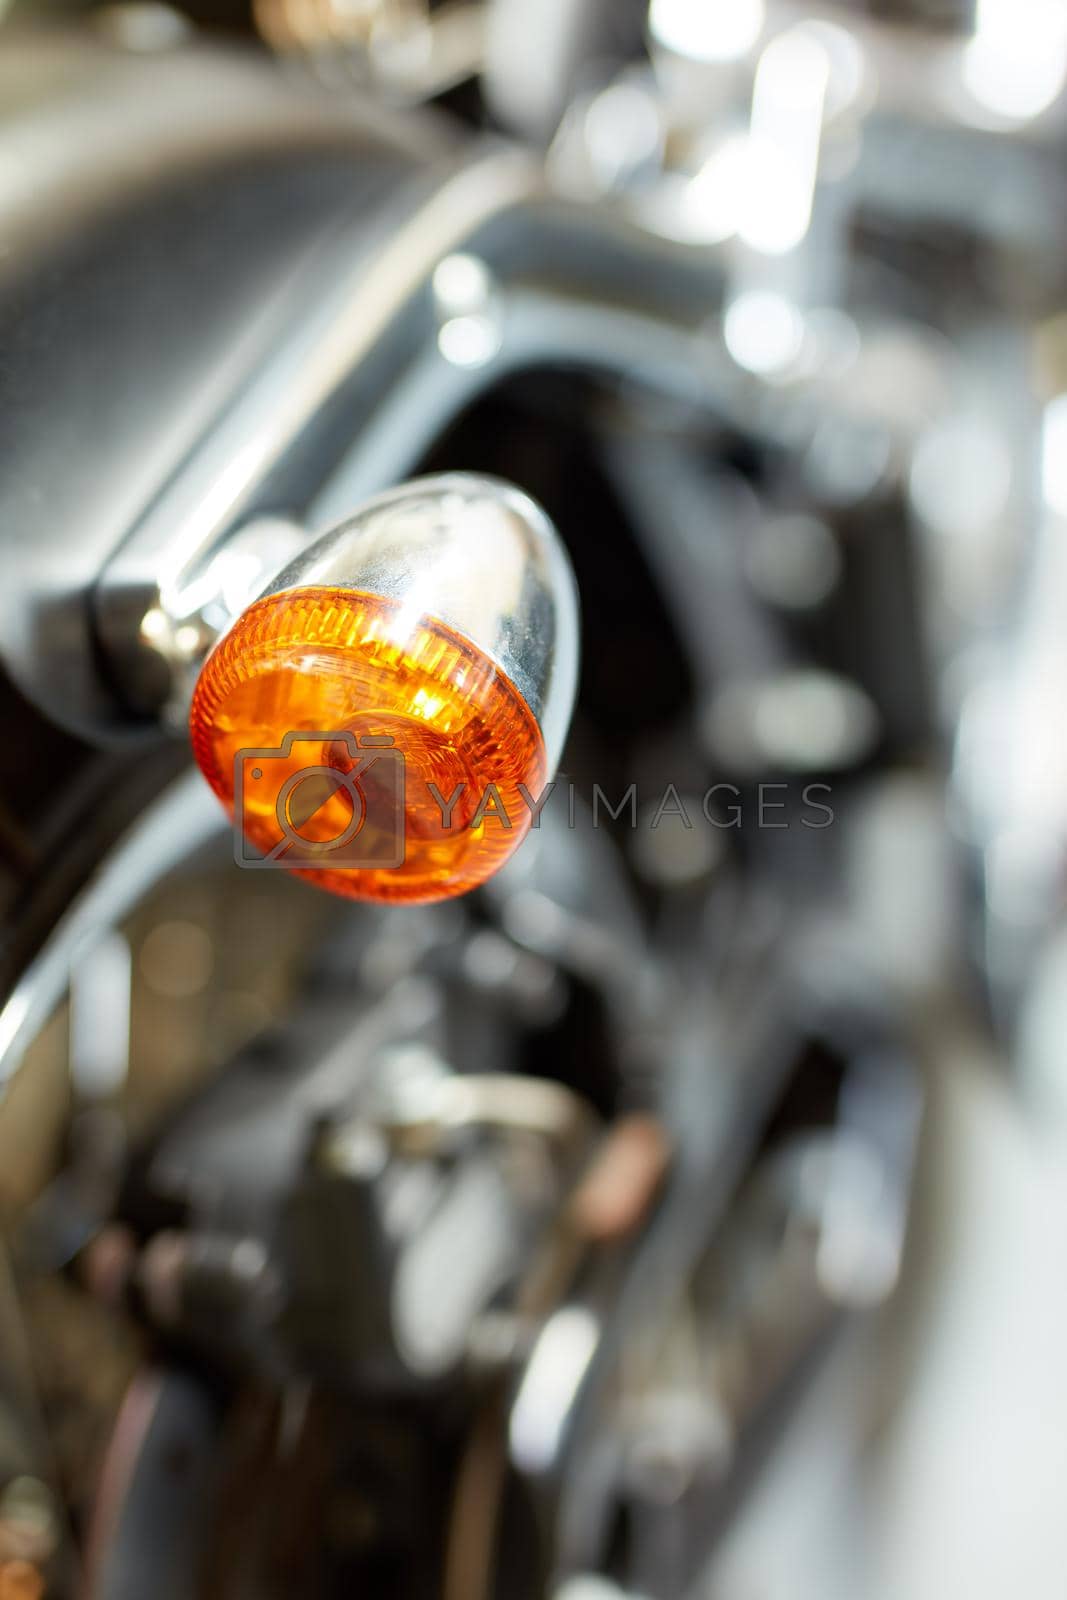 Royalty free image of Closeup rear view of a taillight on a motorbike. Orange turning light on a blurred black vintage motorcycle. One modern chrome transportation vehicle. Maintenance on a shiny classic retro custom bike by YuriArcurs